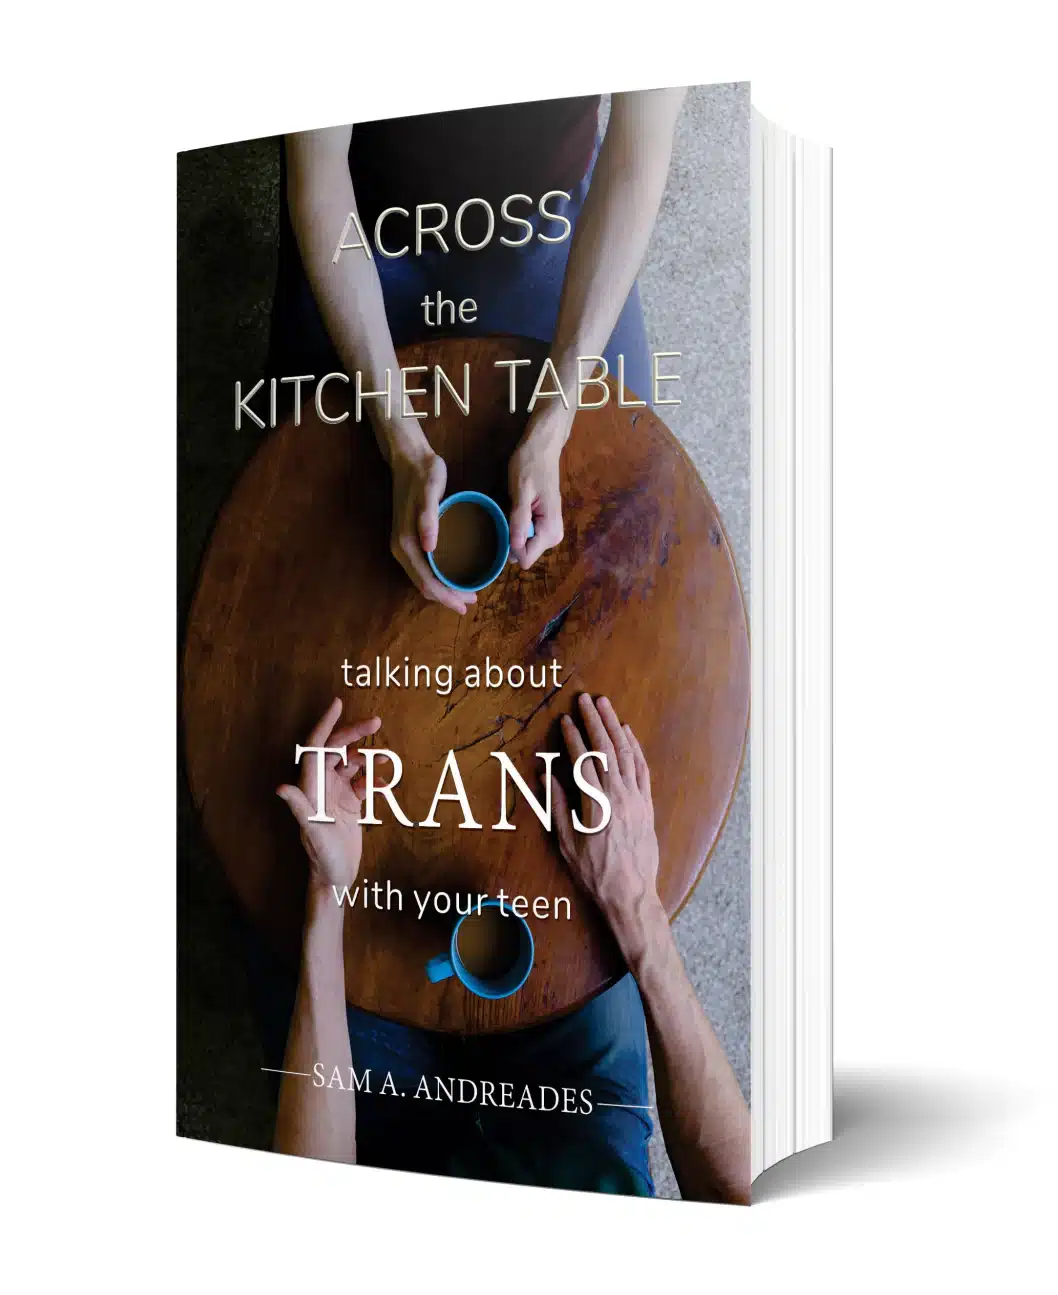 Across The Kitchen Table: Talking About Trans With Your Teen